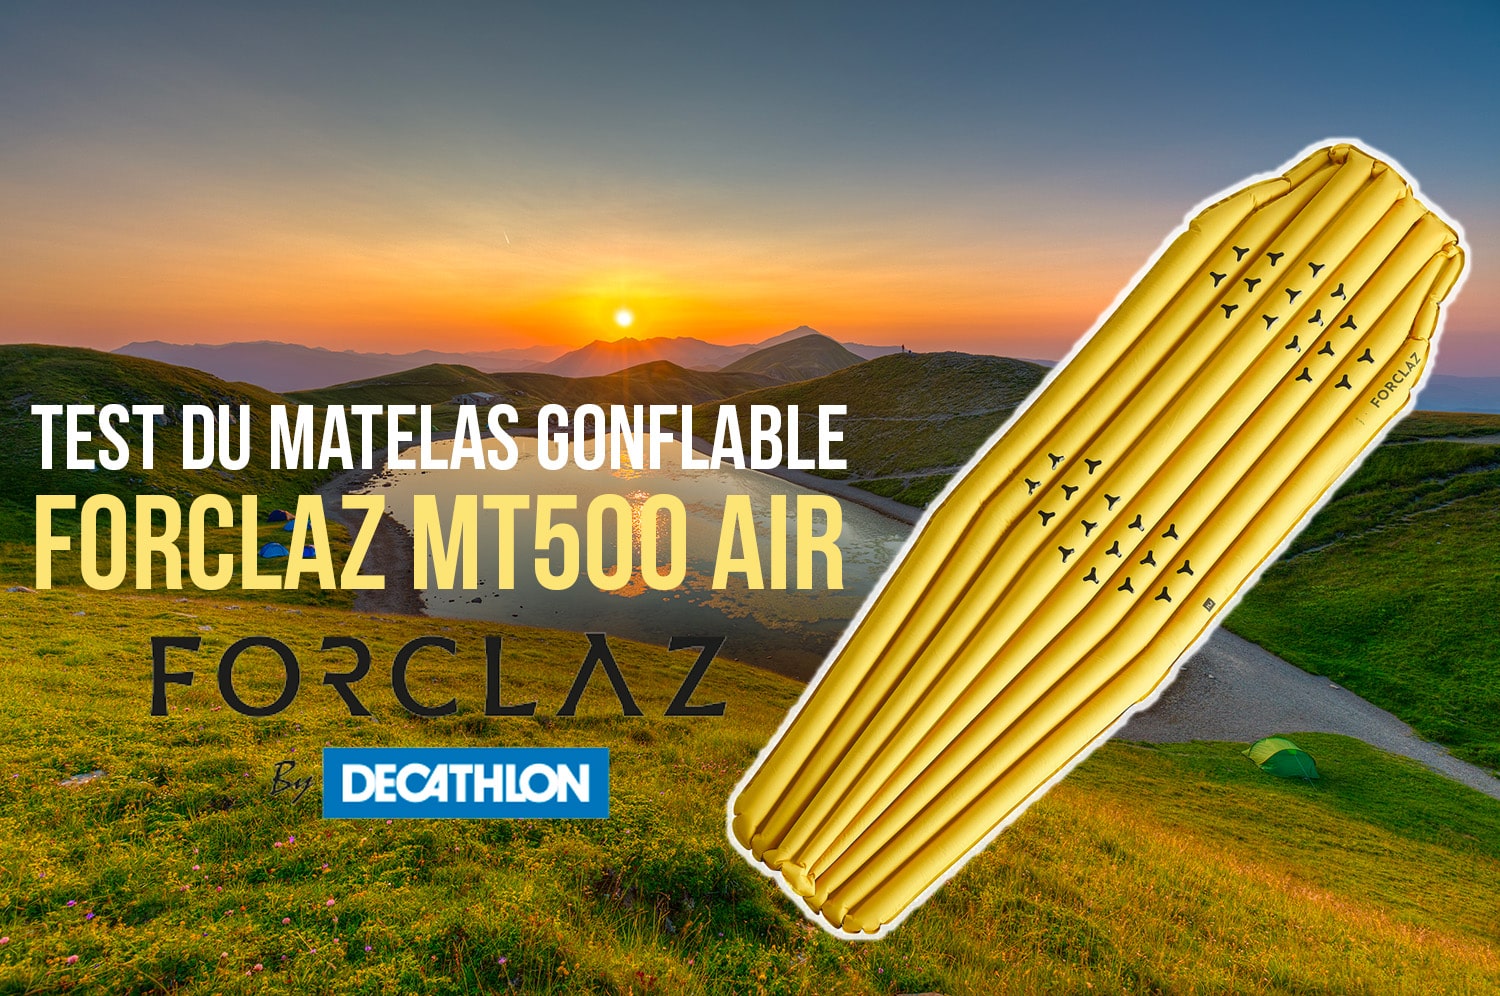 You are currently viewing Test du matelas gonflable Forclaz MT500 Air